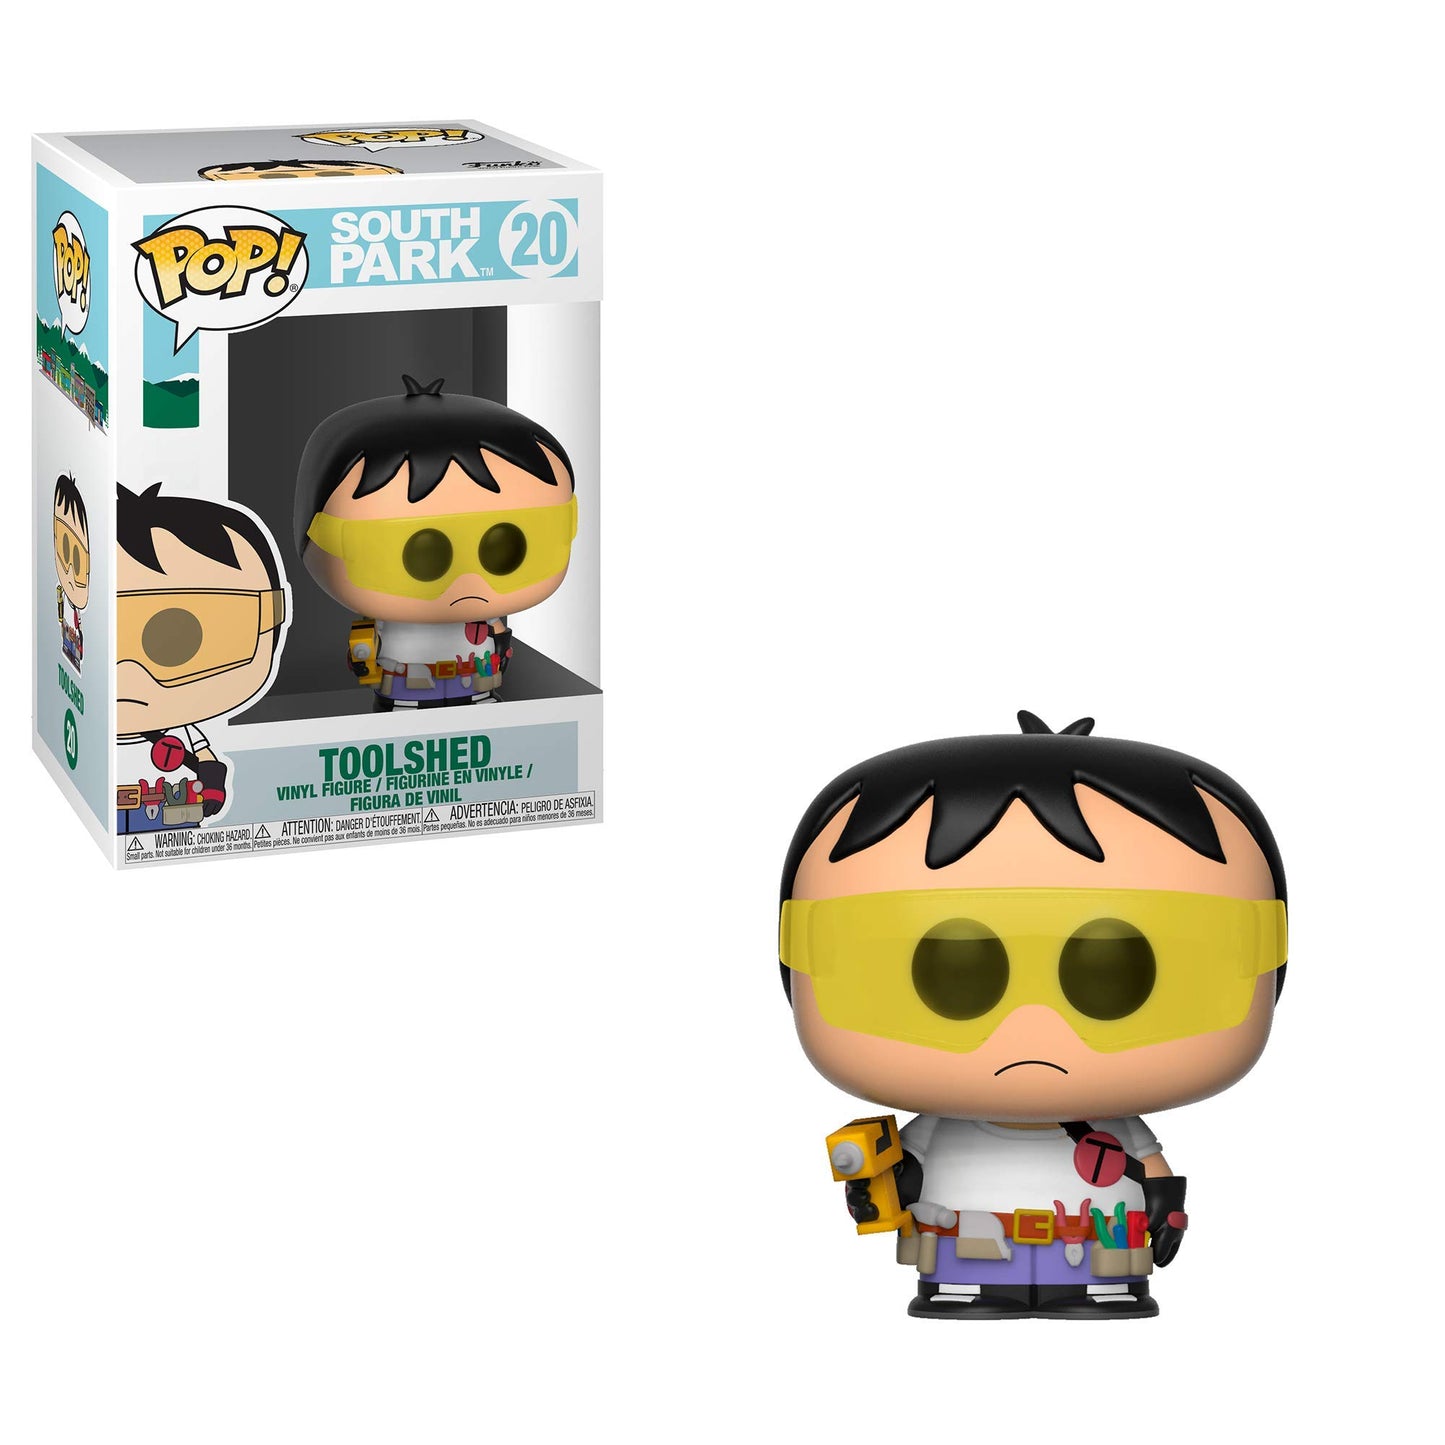 Funko POP! South Park Toolshed #20